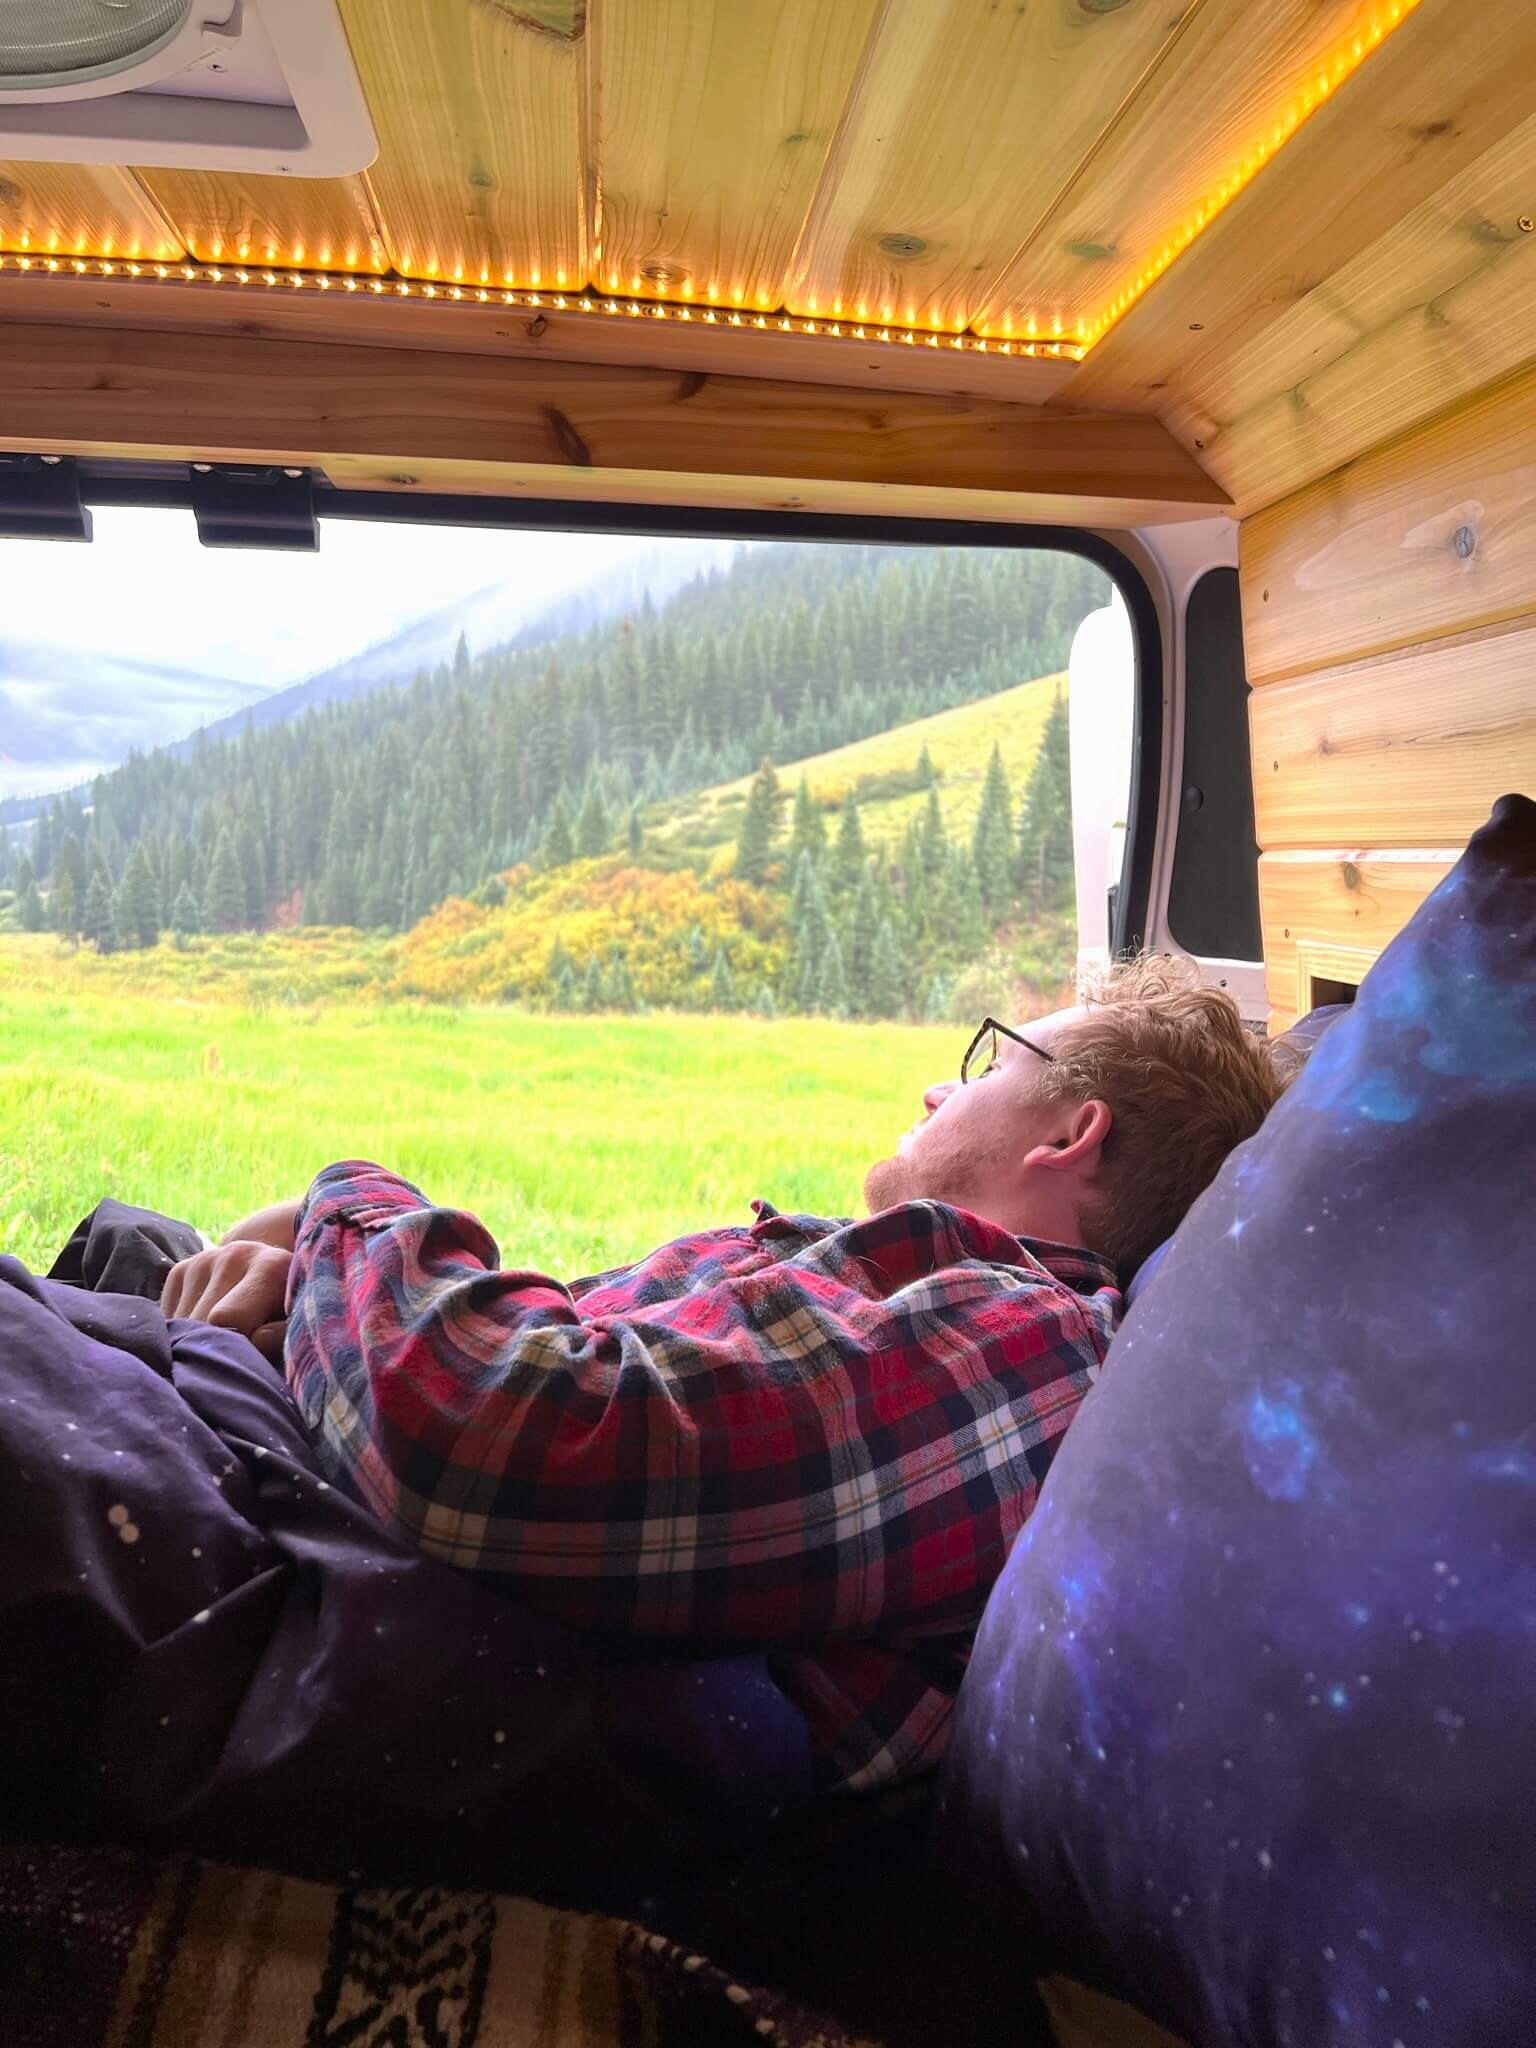 Man in Red Plaid Sleeping in Purple Bedding overlooking Nature